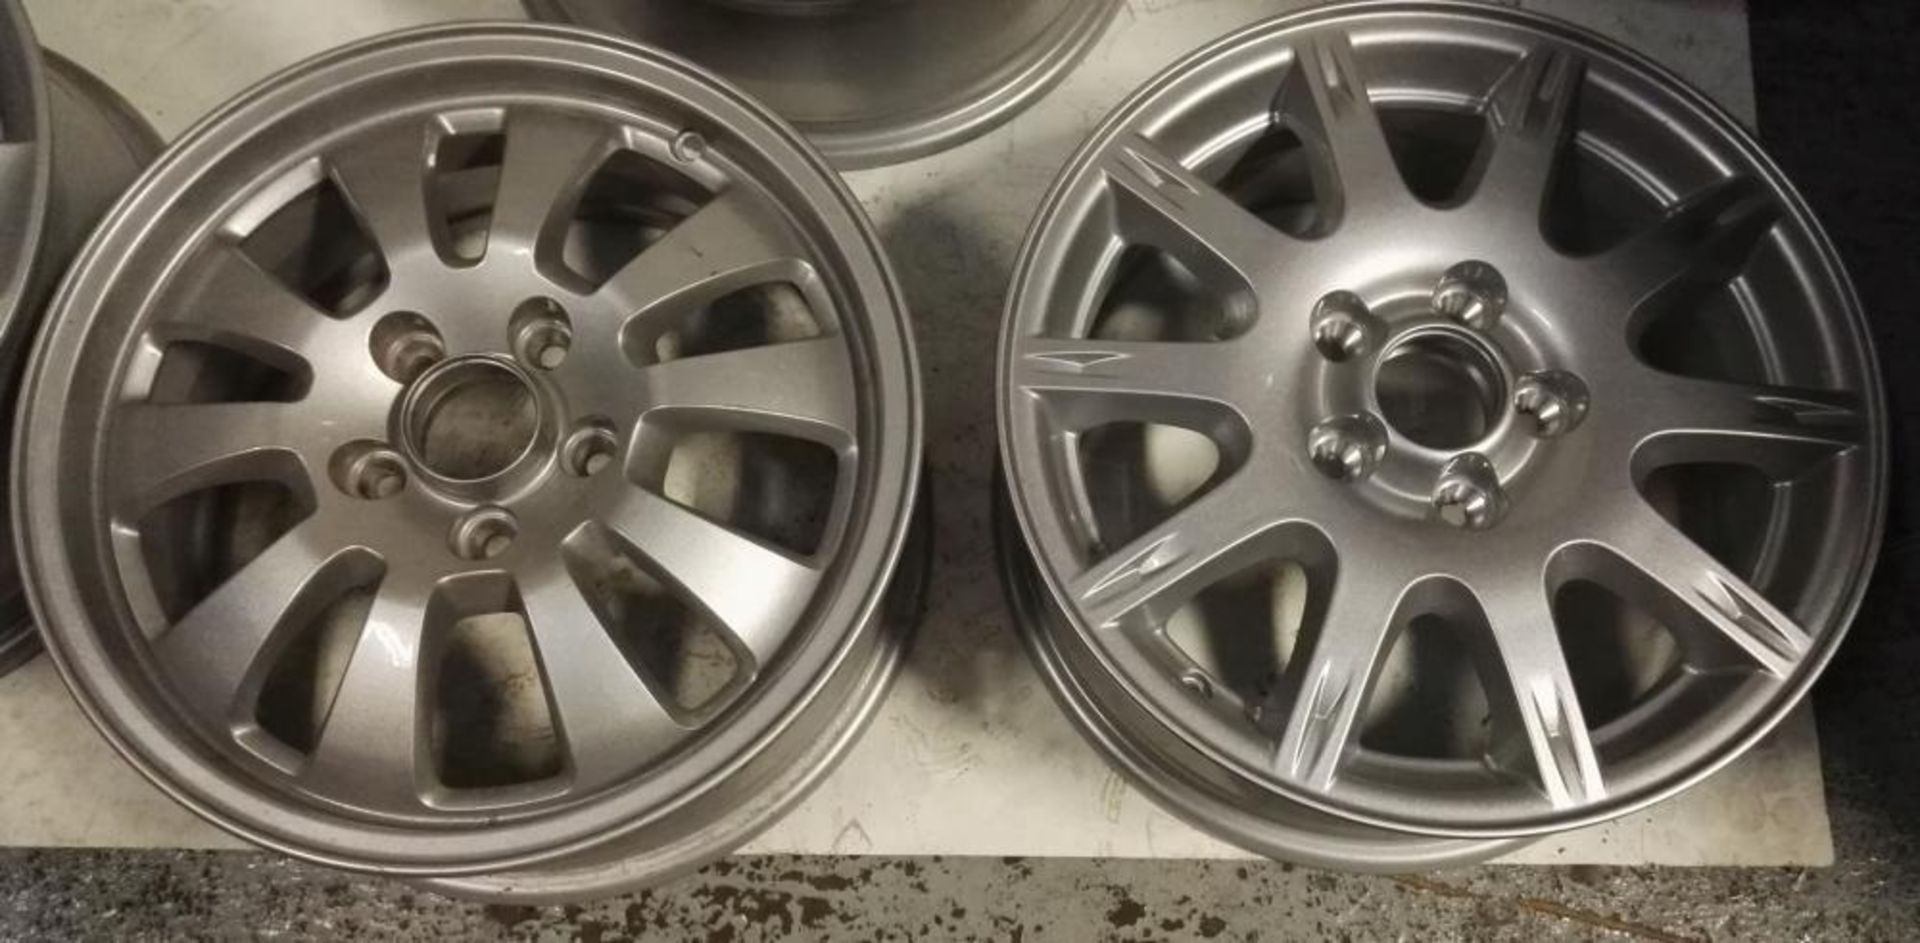 8 x Assorted Alloy Wheels - 15" to 17" - Saab, Opel, Vauxhall, Renault, BBS - CL084 - Location: Altr - Image 8 of 9